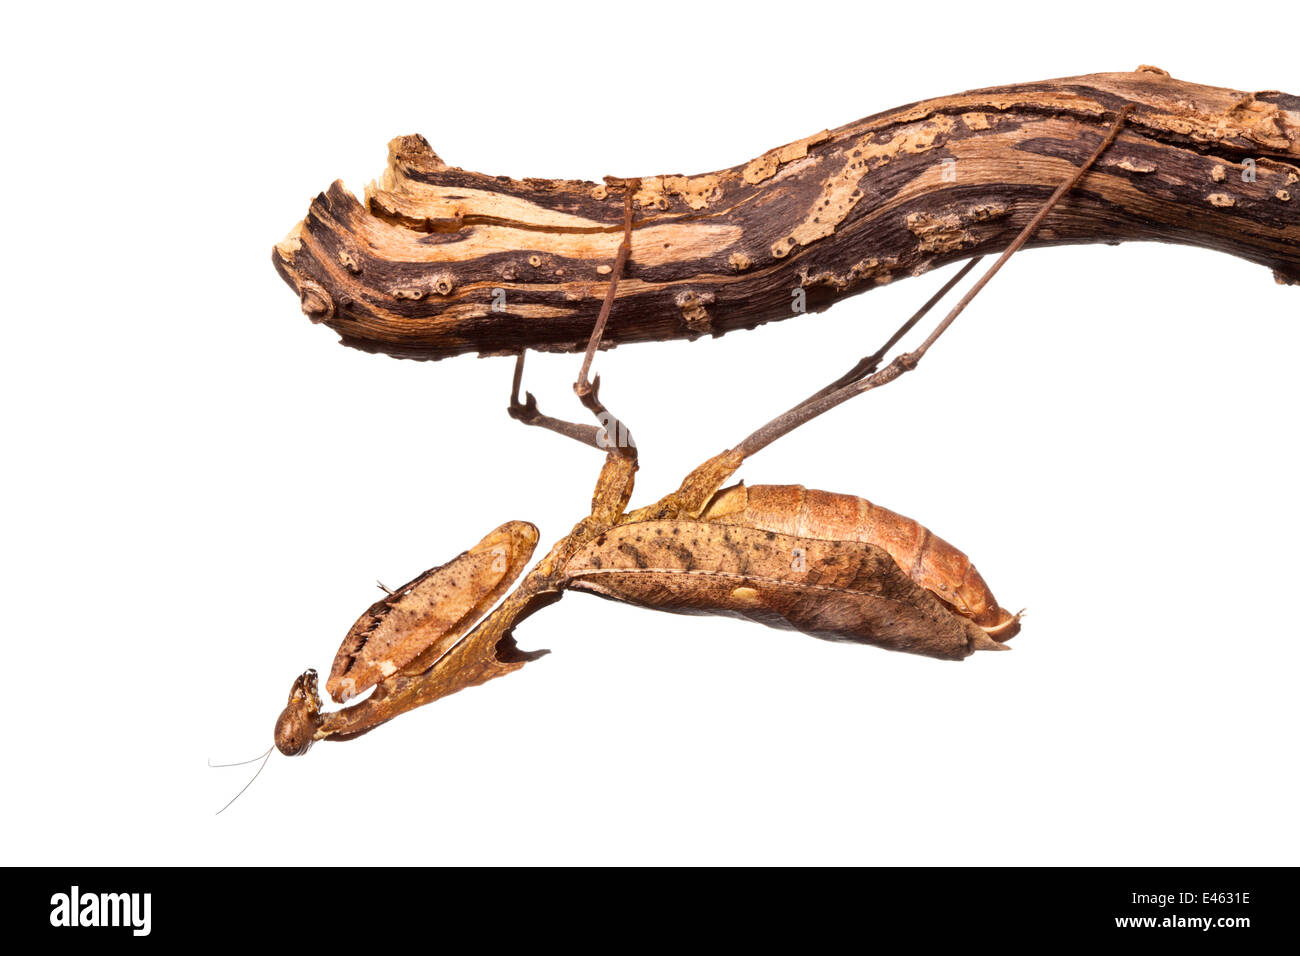 Dead leaf mantis (Deroplatys dessicata) hanging upside down from twig, photographed against a white background, orginating from South East Asia. Captive. Stock Photo